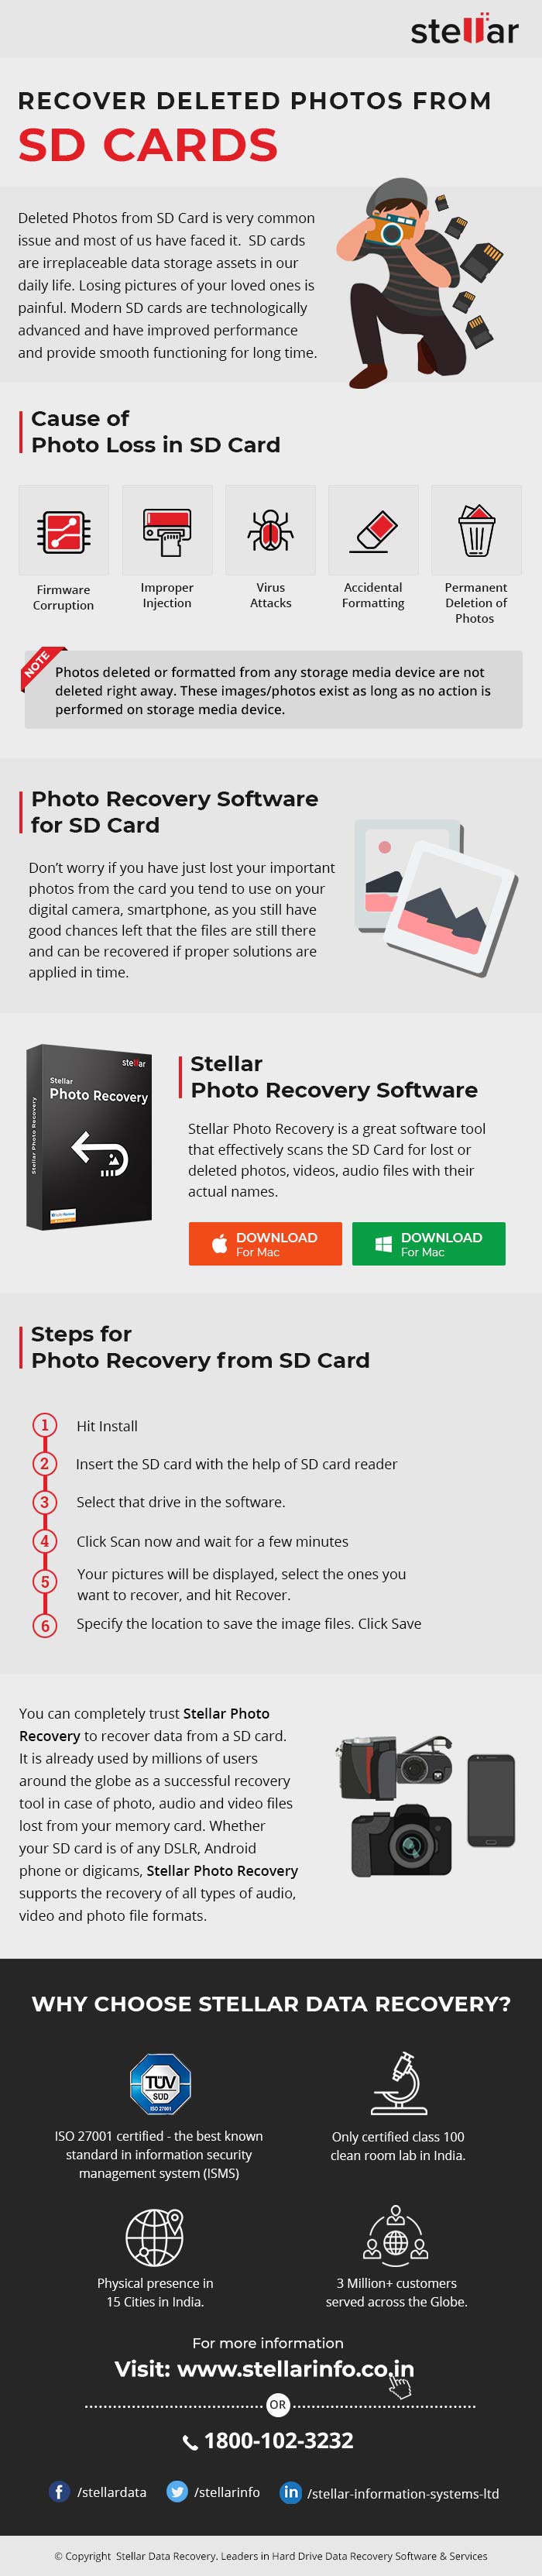 recover deleted photos from memory card